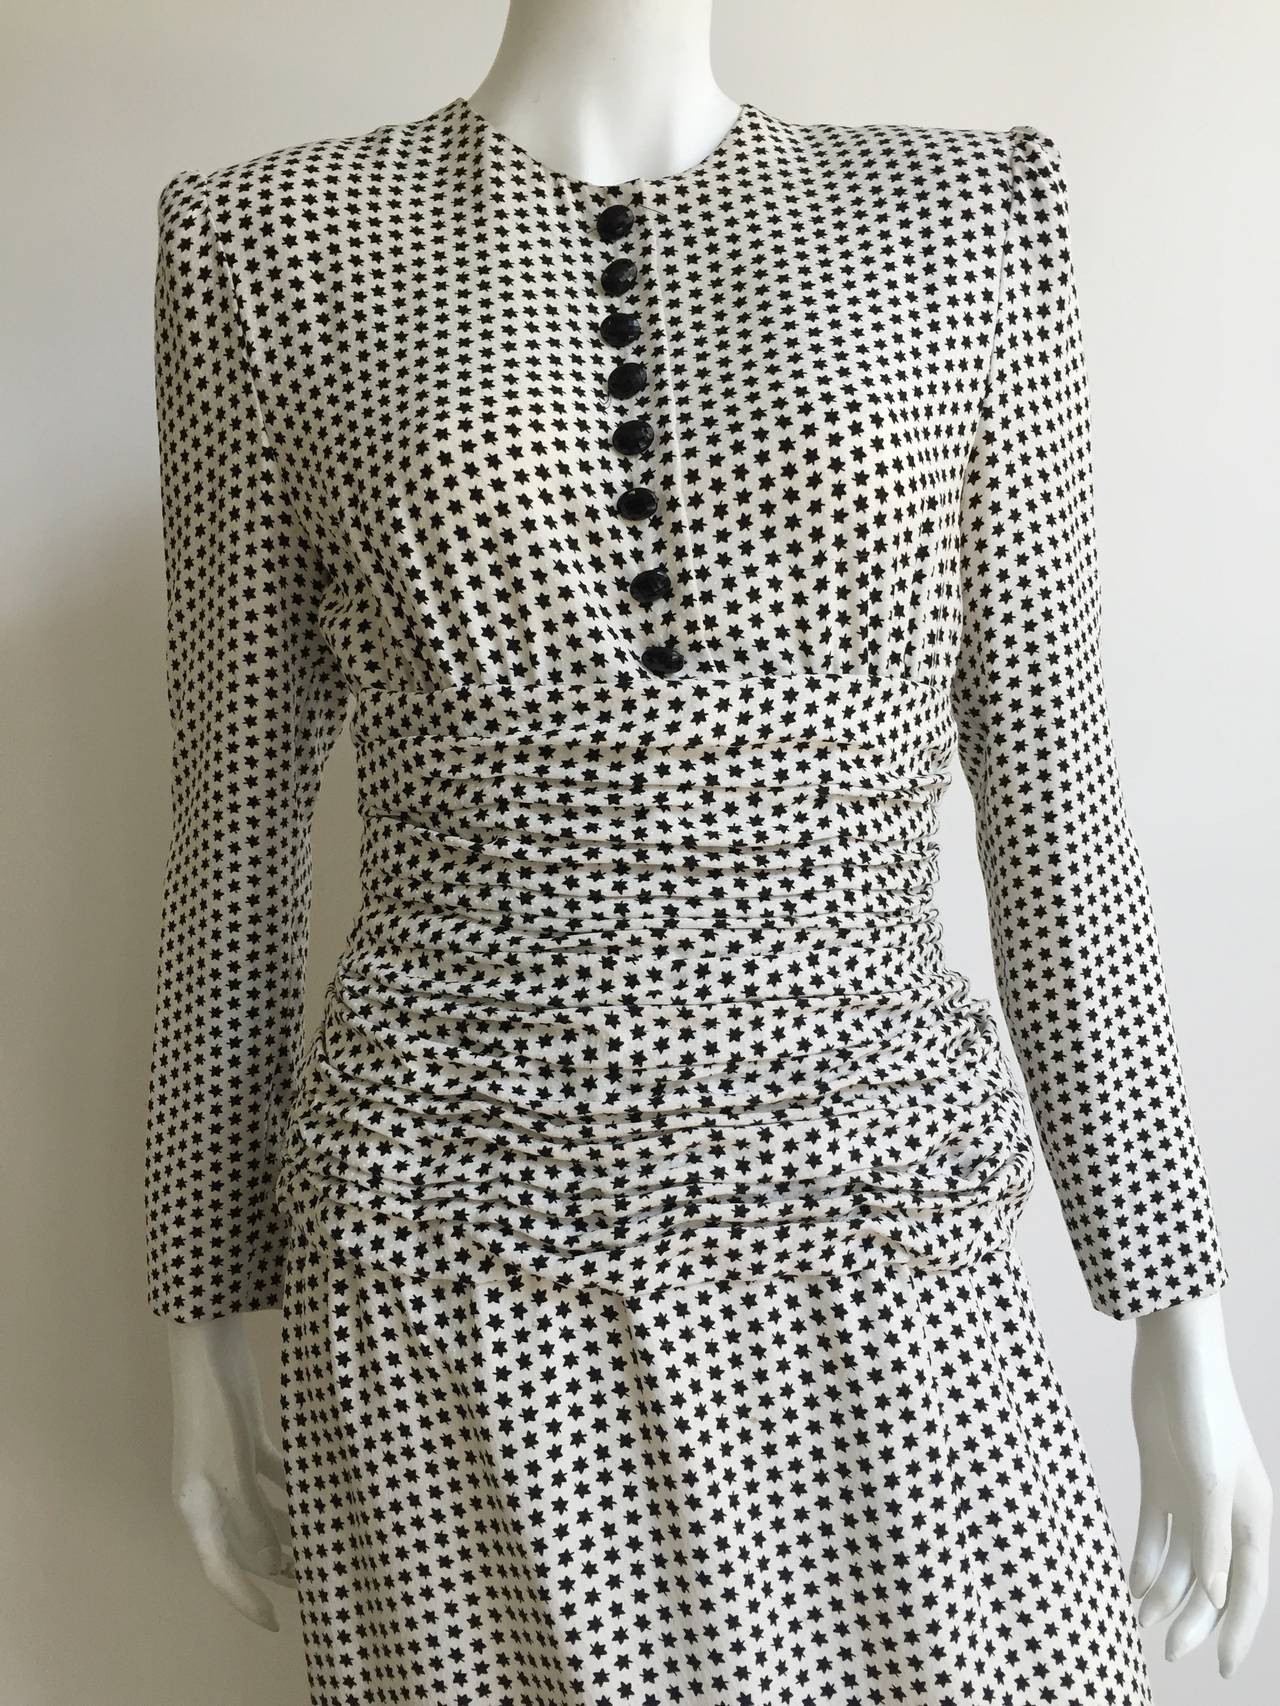 Adele Simpson for Neiman Marcus 1980s black / white 'star' pattern silk dress size 6 ( Please see & use measurements to make sure this fits your body to perfection). Ruching accentuates the waistline giving that 1940s glamour appeal. There are